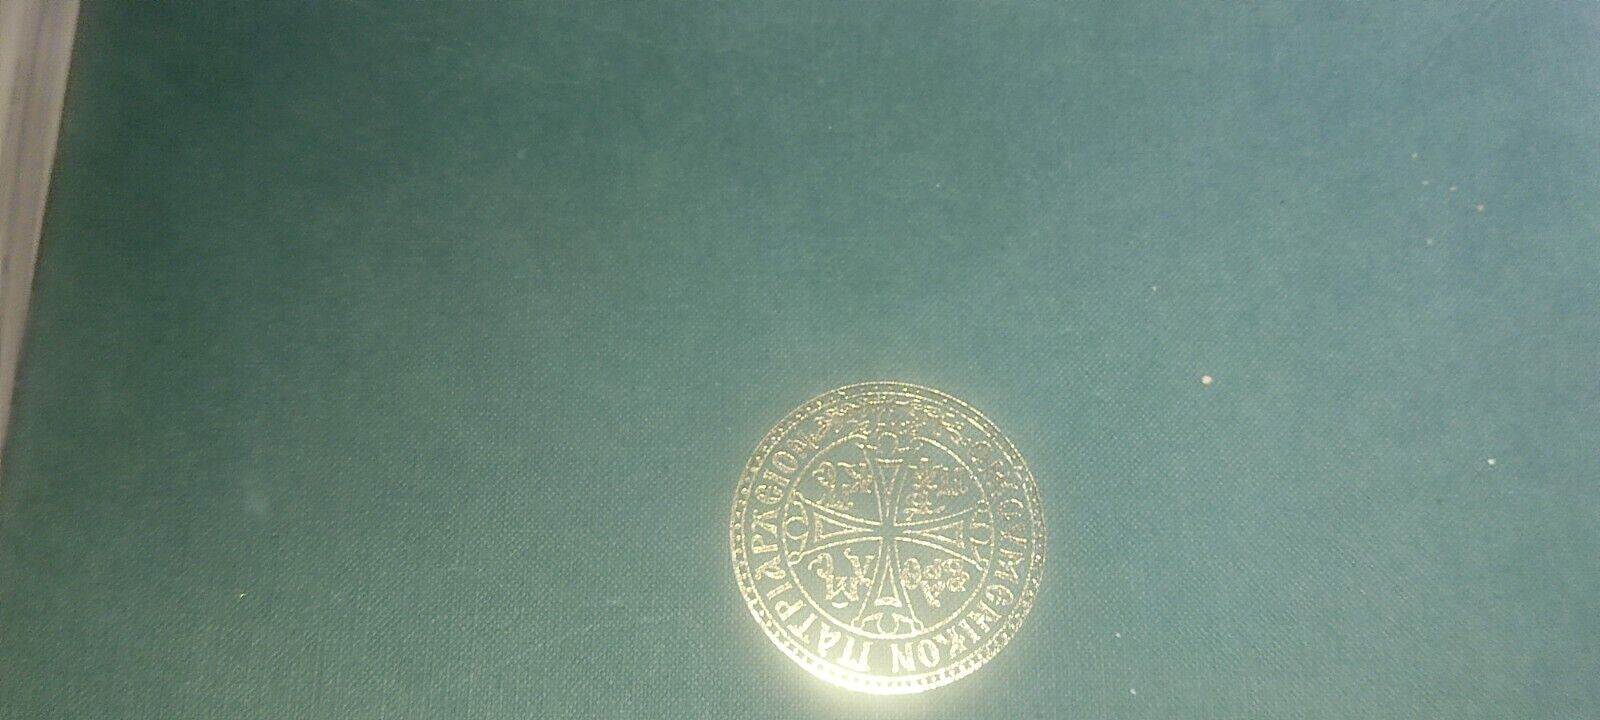 ☆very rare coin☆box set☆from the☆ Patriarch himself Bartholomew☆